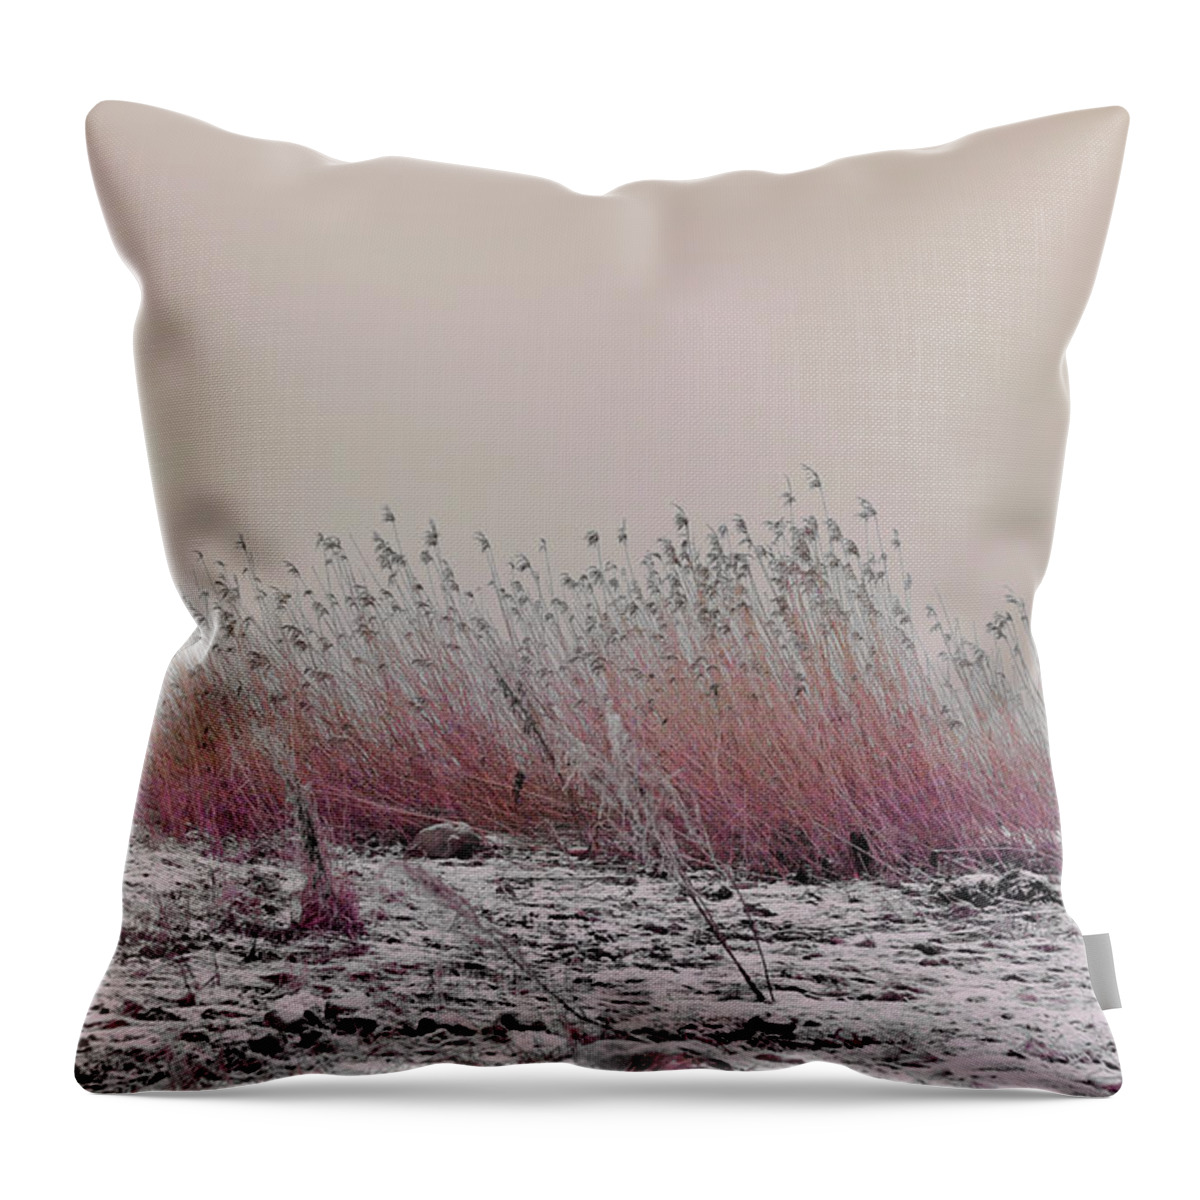 Soothing Throw Pillow featuring the photograph Soothing View by Randi Grace Nilsberg